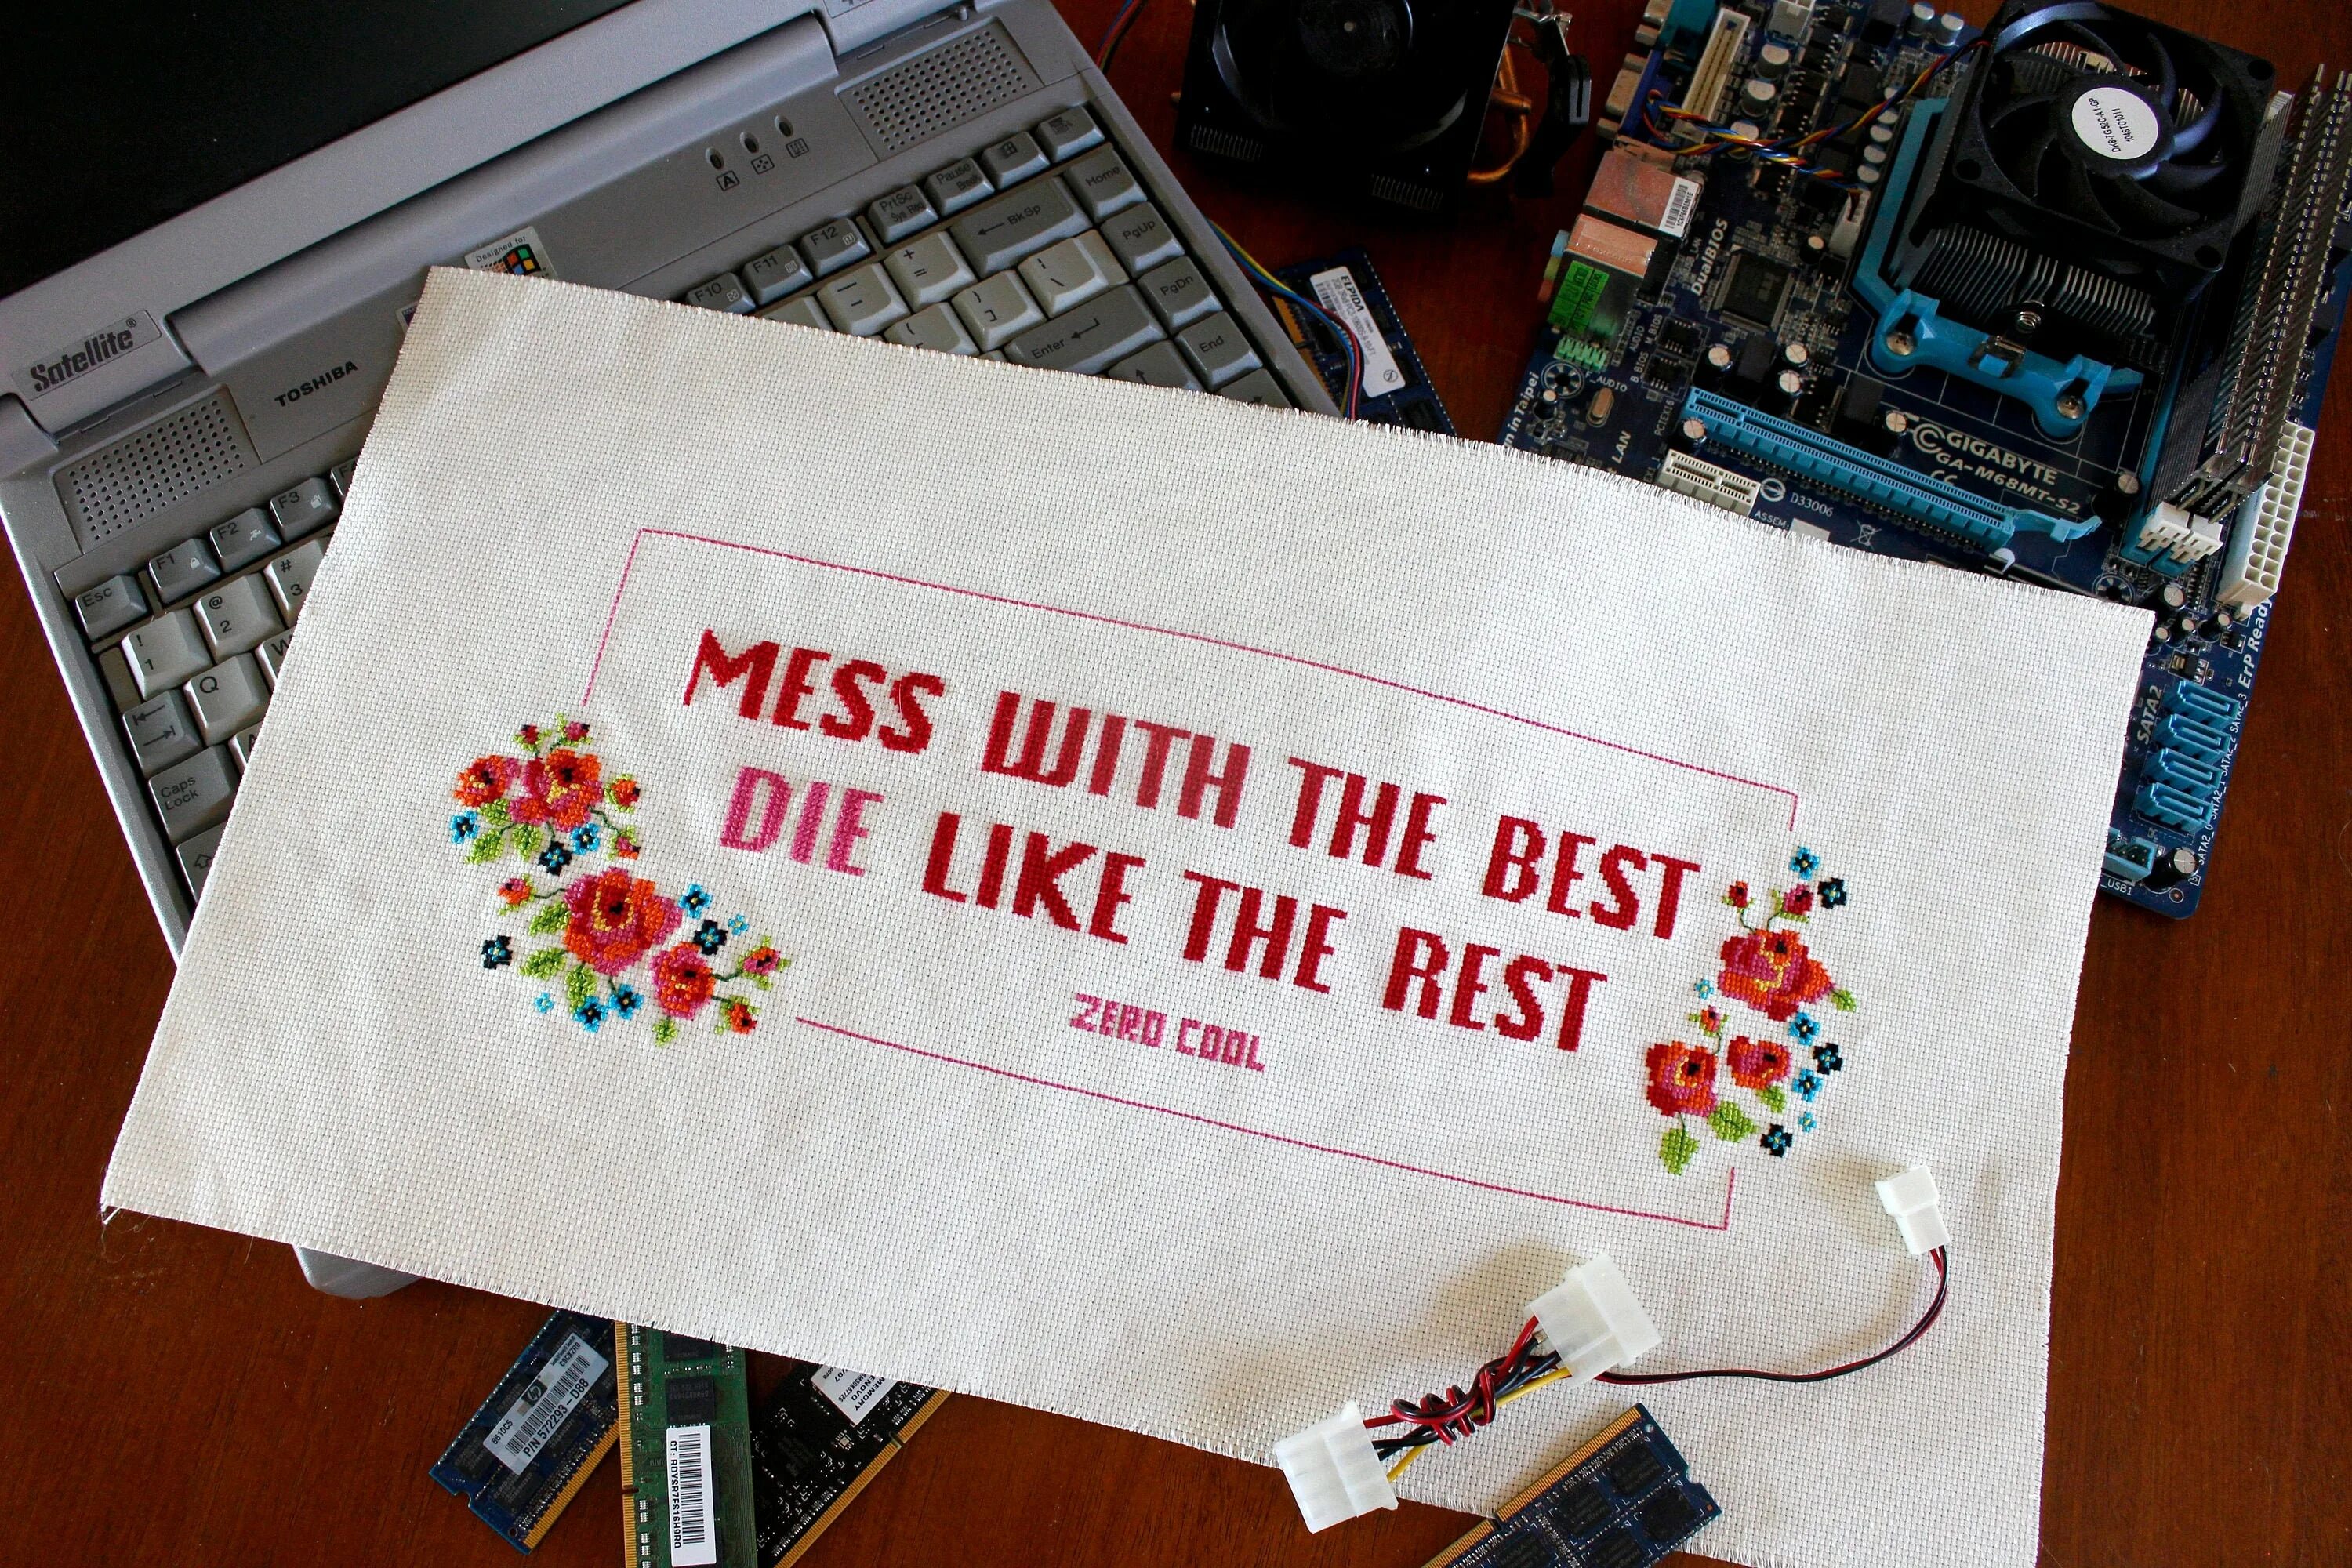 Mess with the best die like the rest. Футболка mess with the best die like the rest. Mess with the best - die like the rest! Echo5538. Hackers movie quotes. I well die